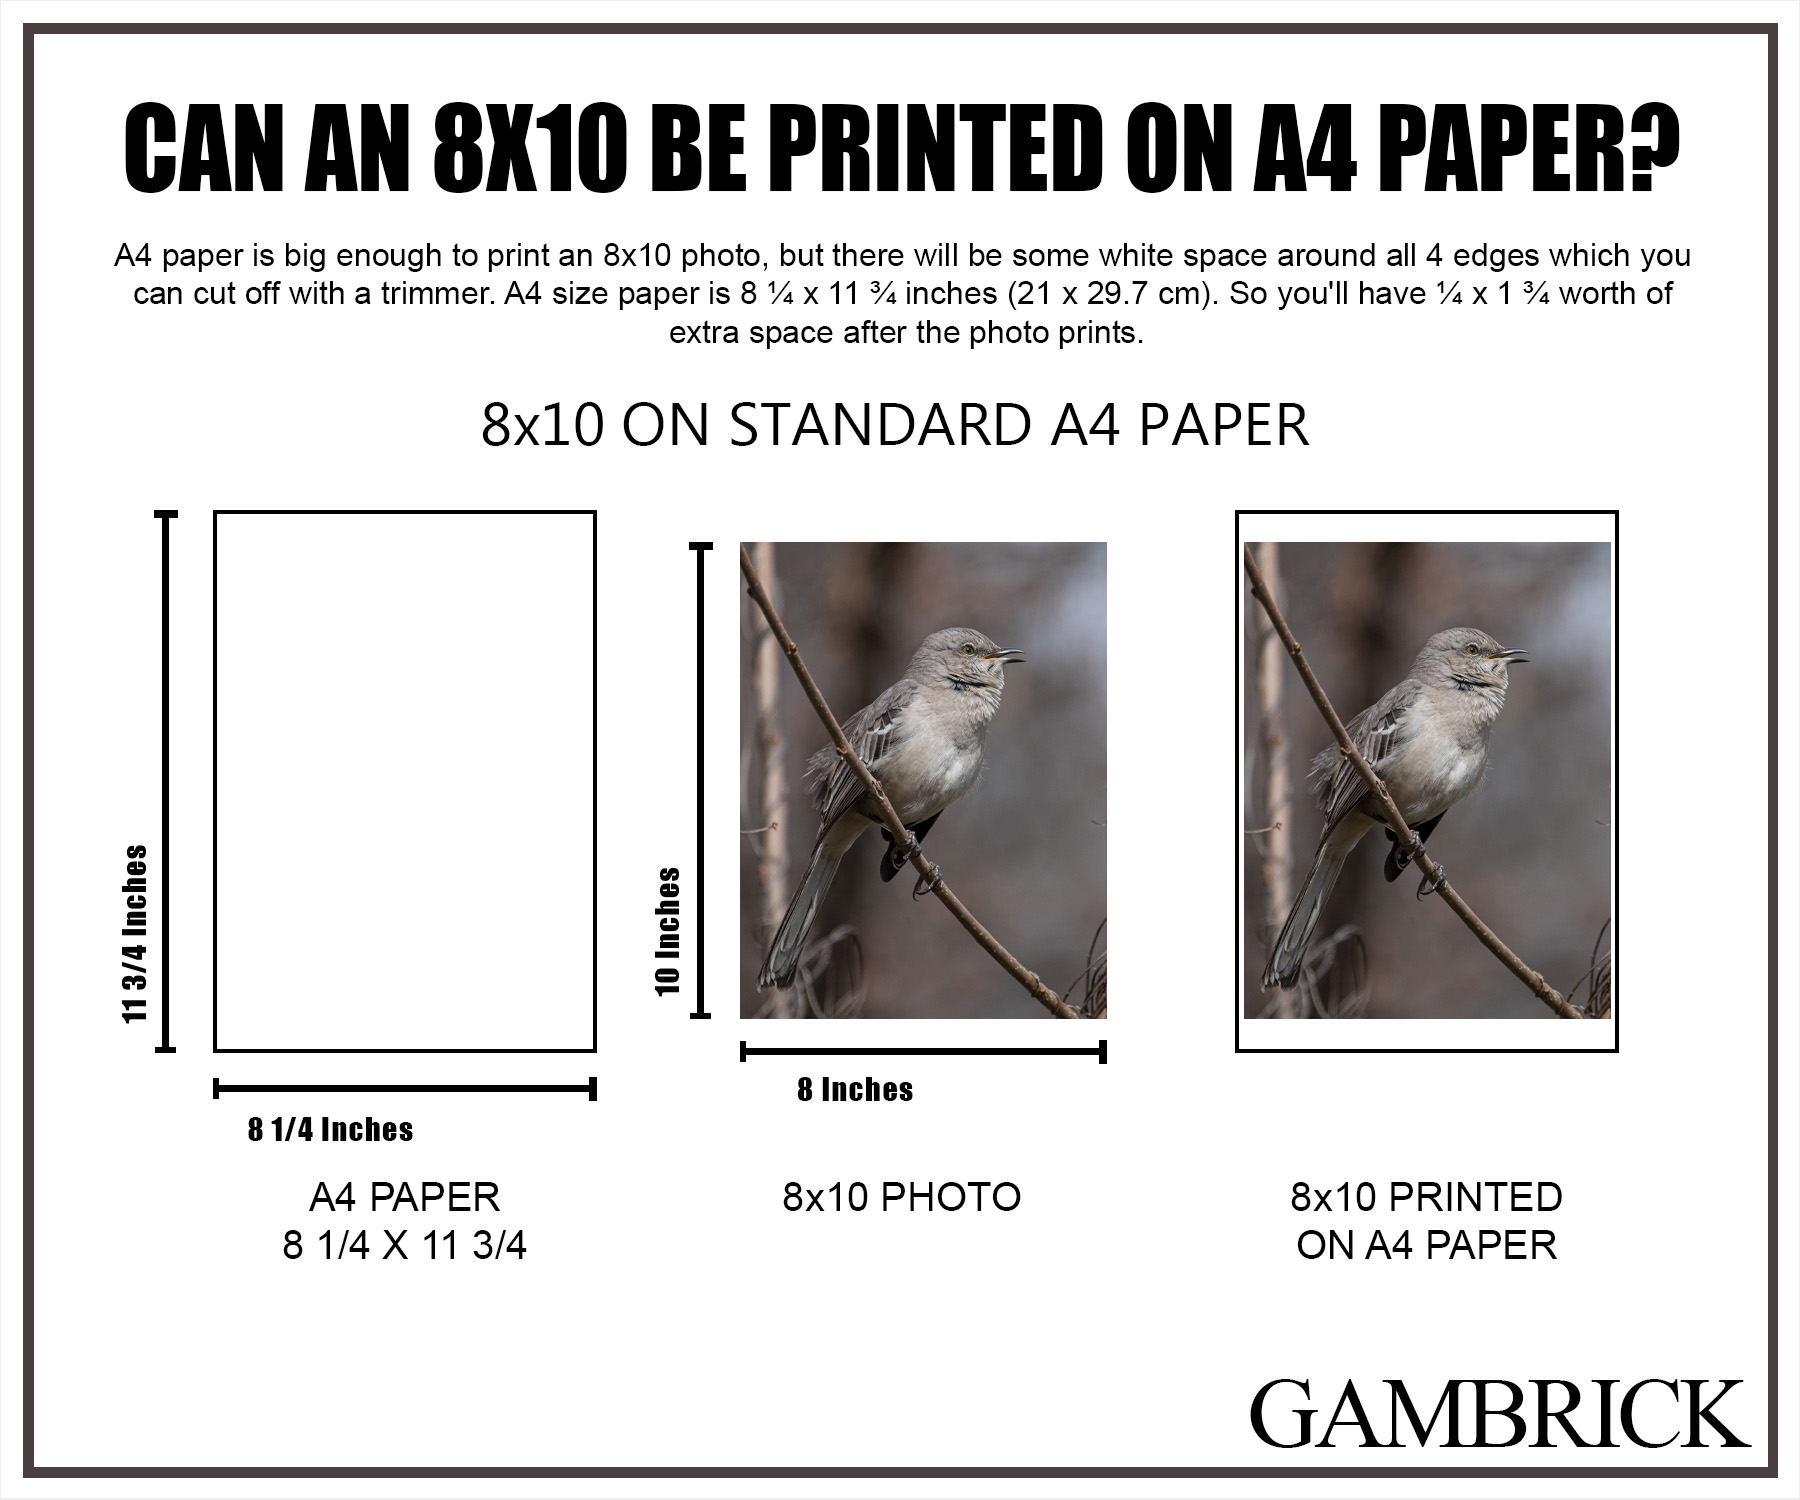 Can an 8x10 be printed on A4 paper infographic chart 1.1 copy